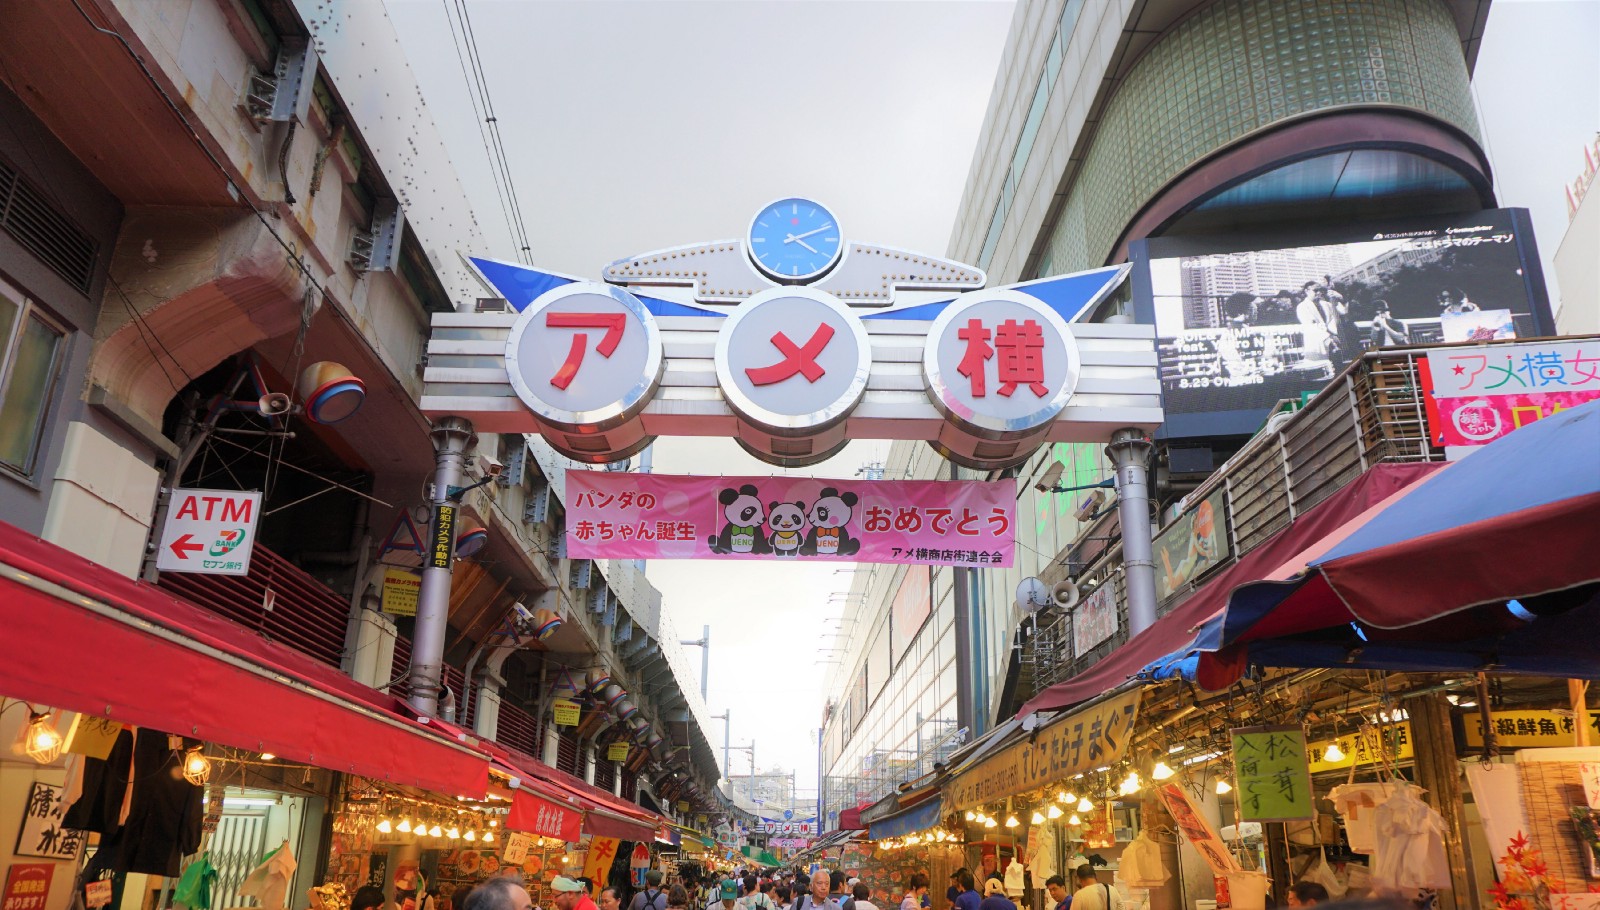 Ameyoko Street filled by shops and vendors